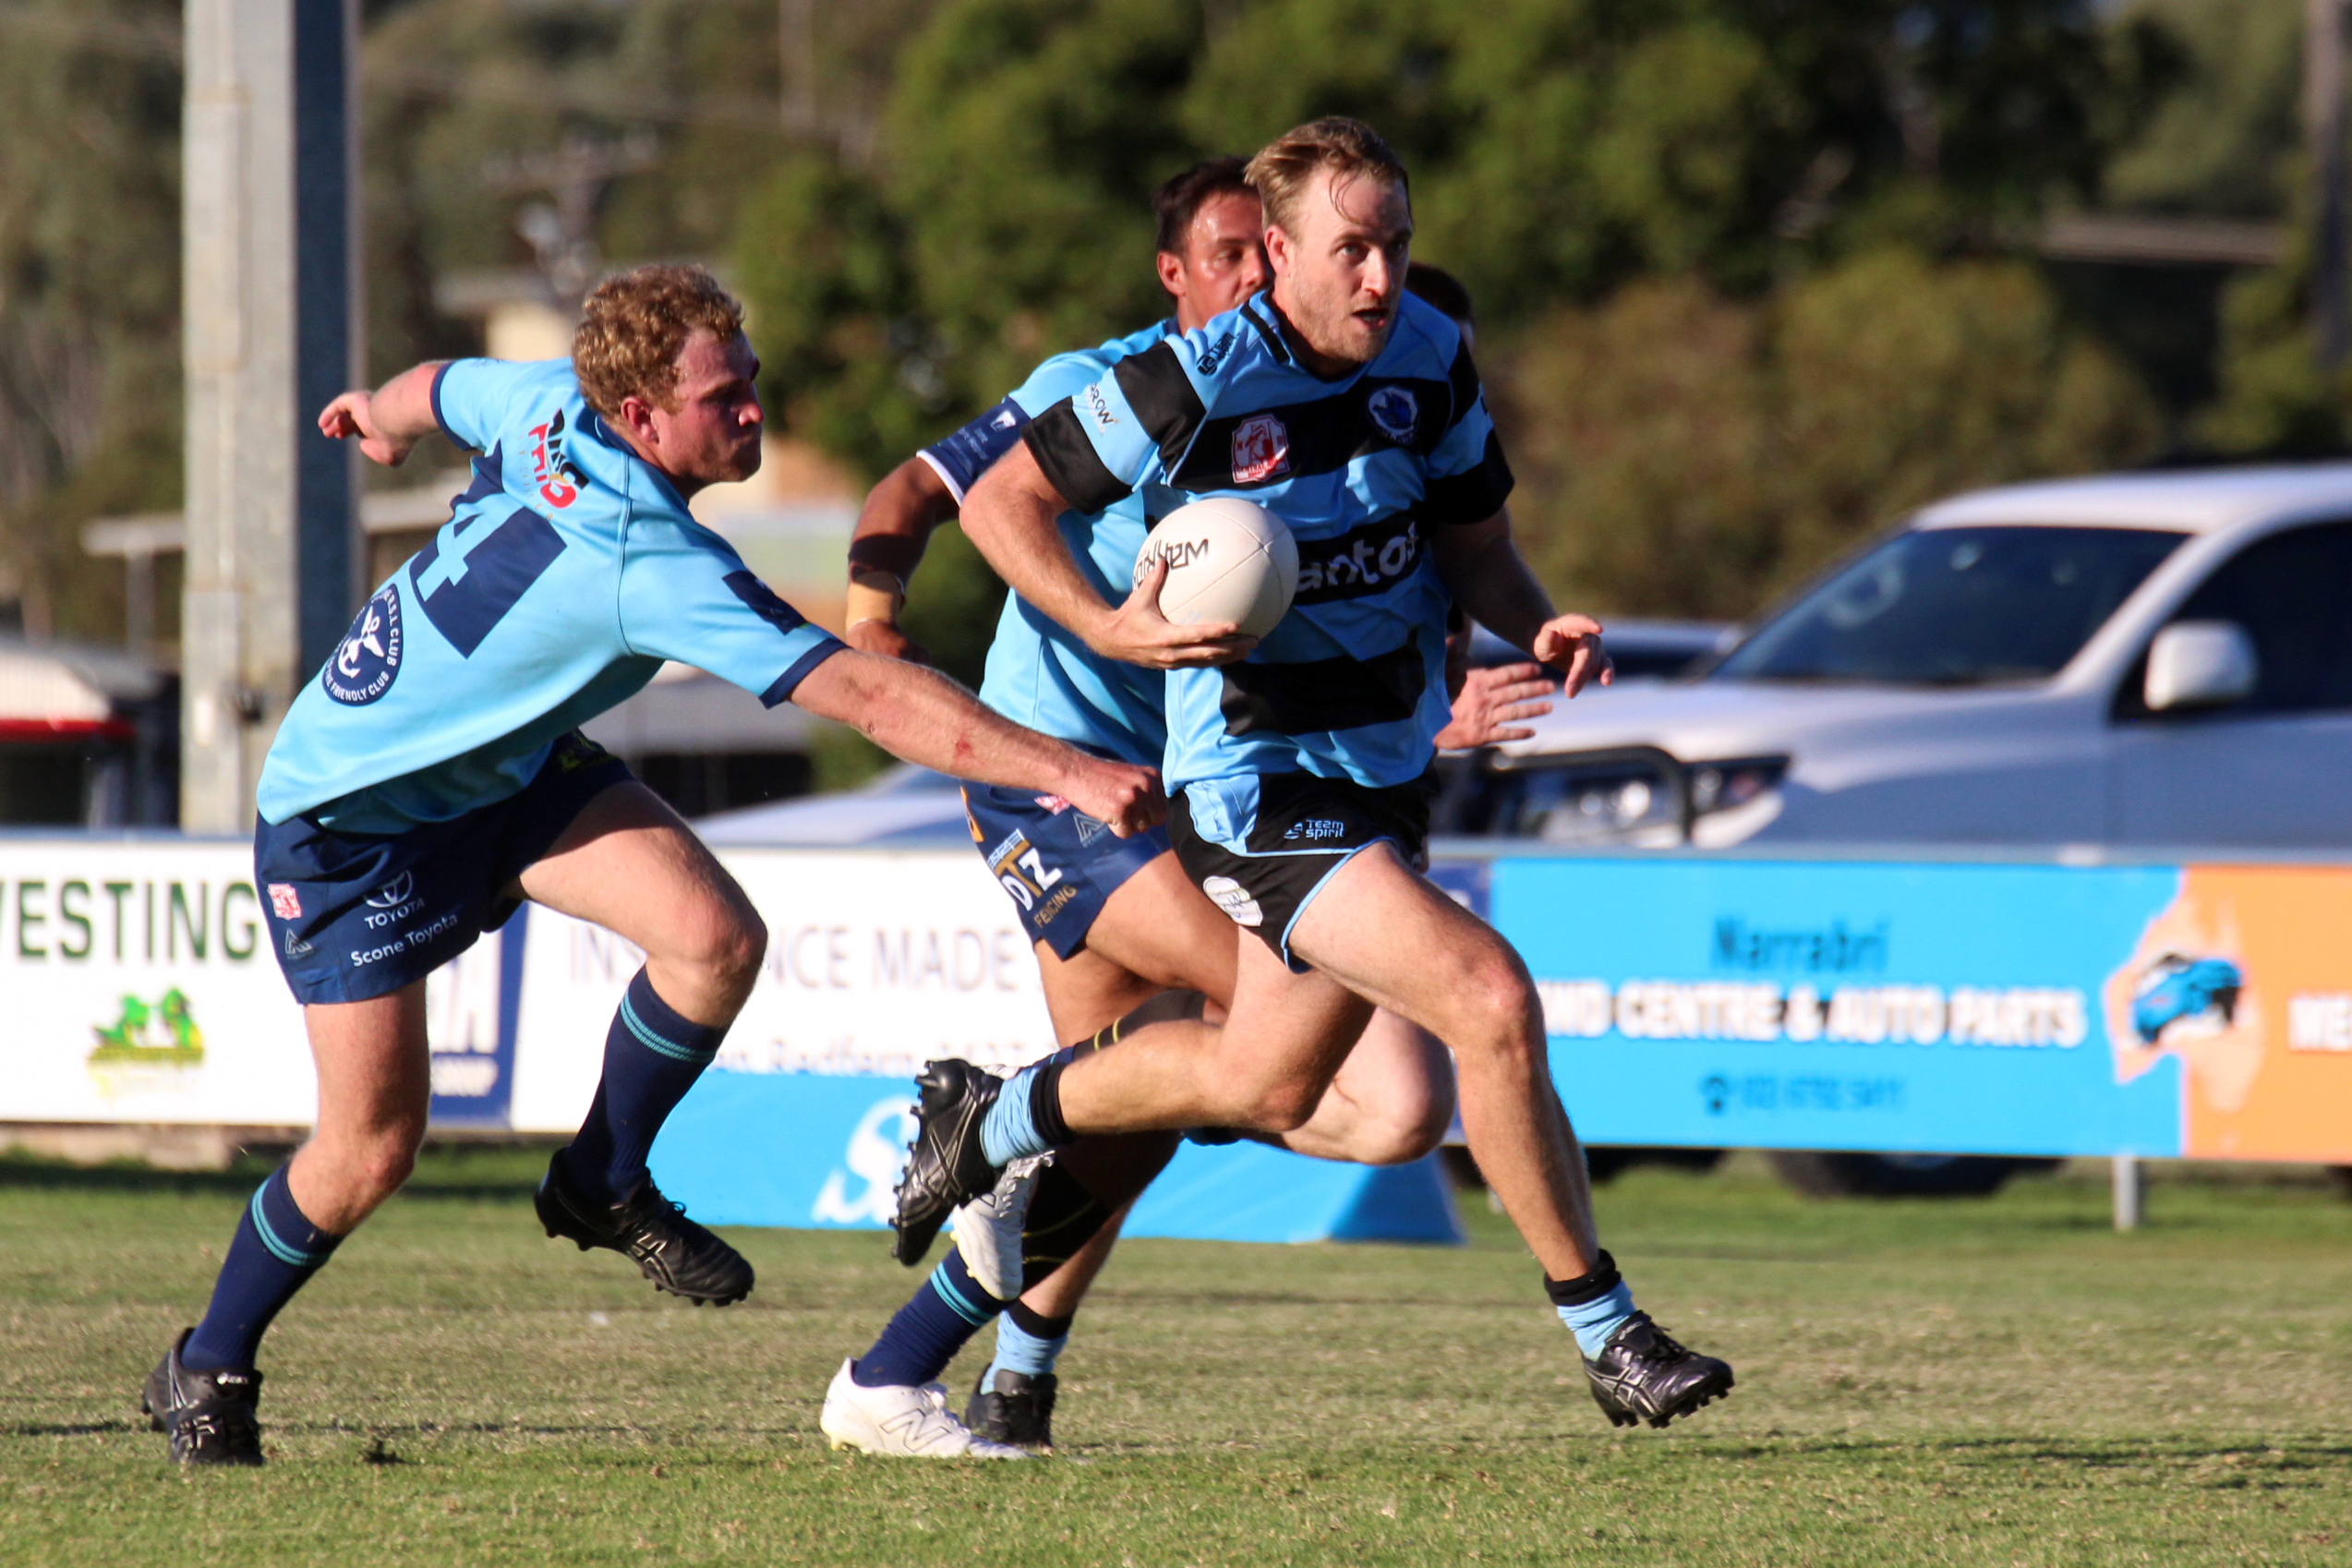 Narrabri Blue Boars prevail in all three grades during first Dangar Park outing of the season